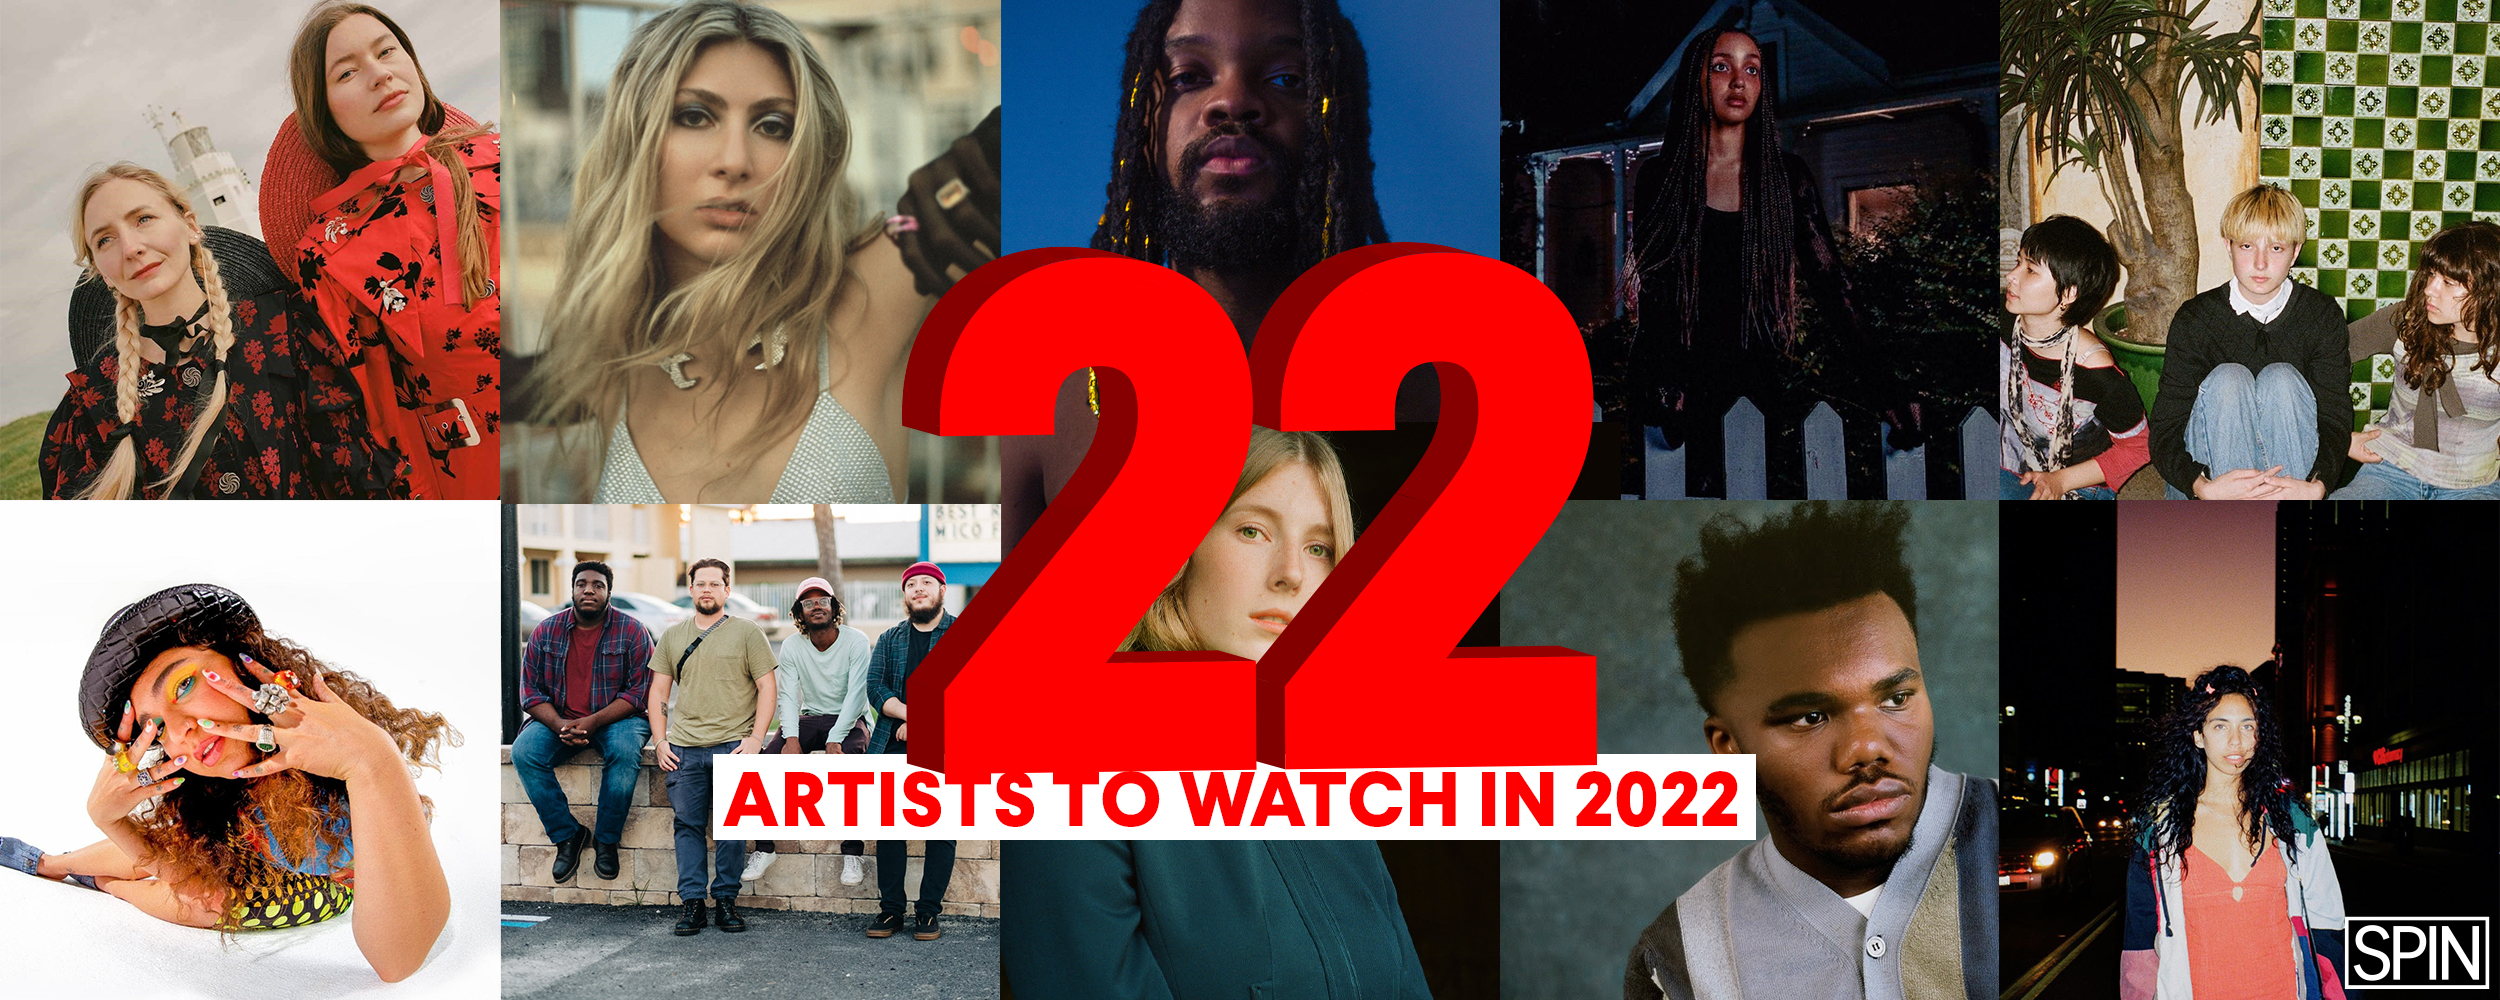 22 Artists to Watch in 2022 Pro Music Miami